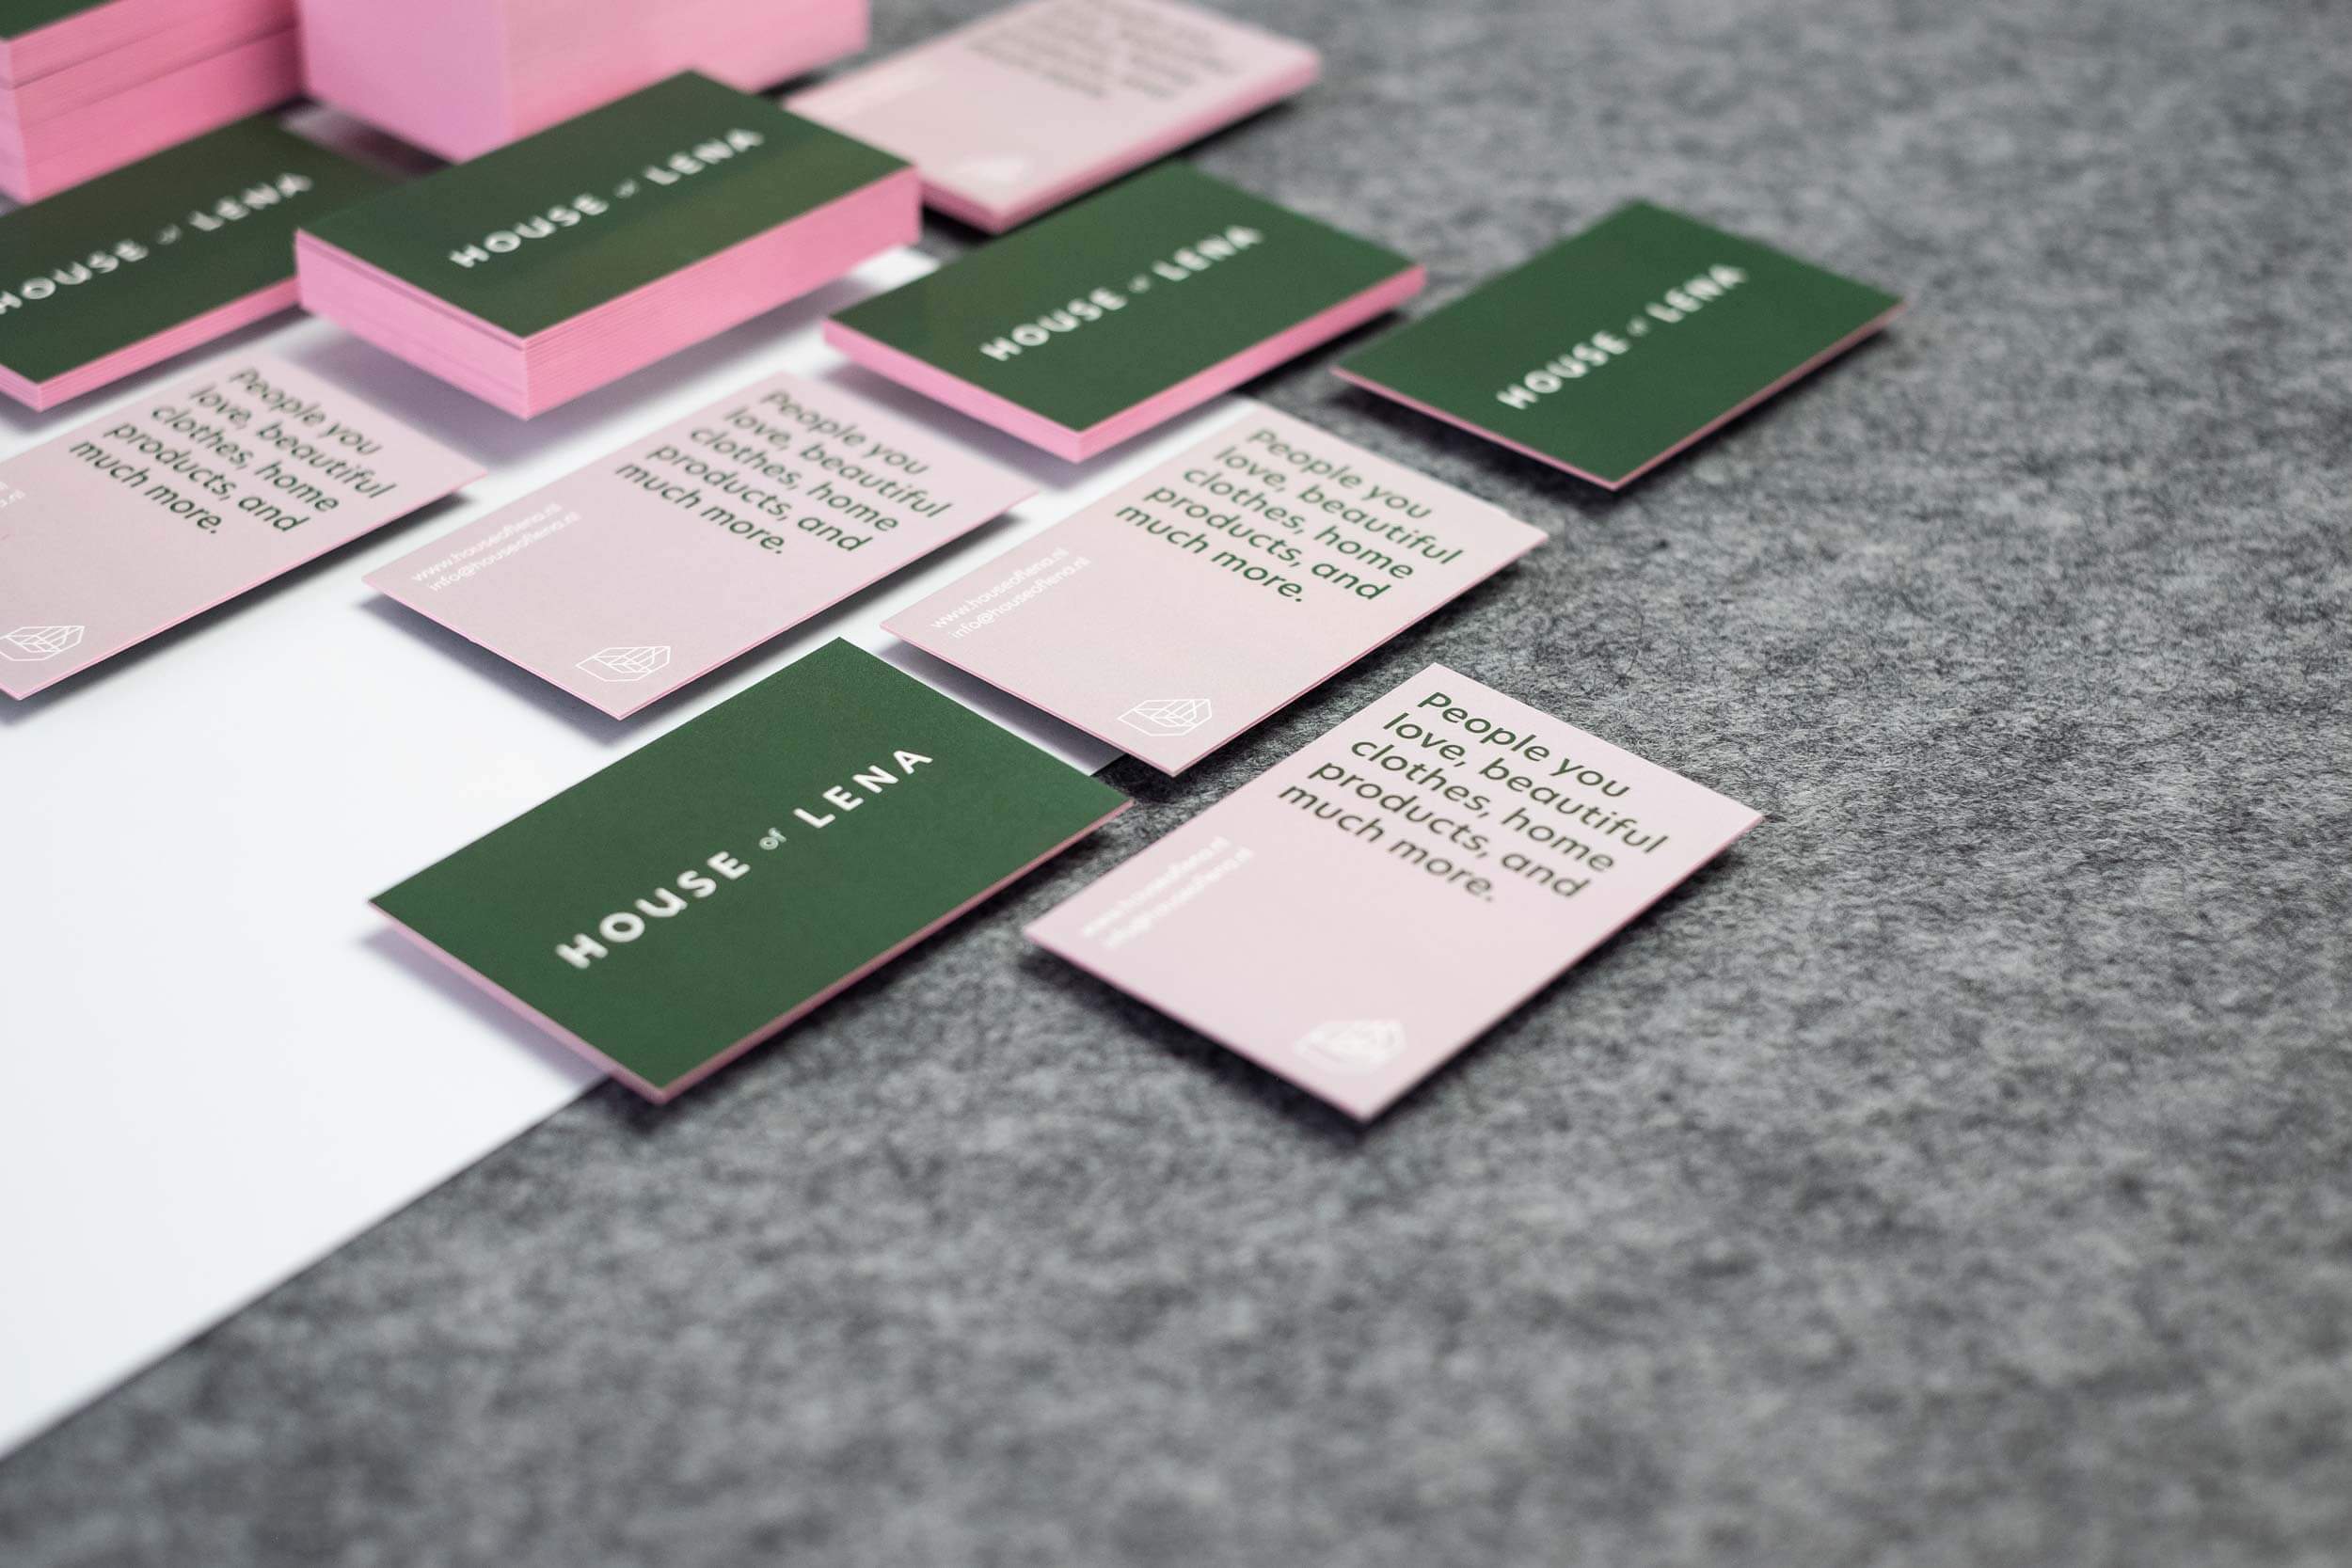 An overview of House of Lena business cards.